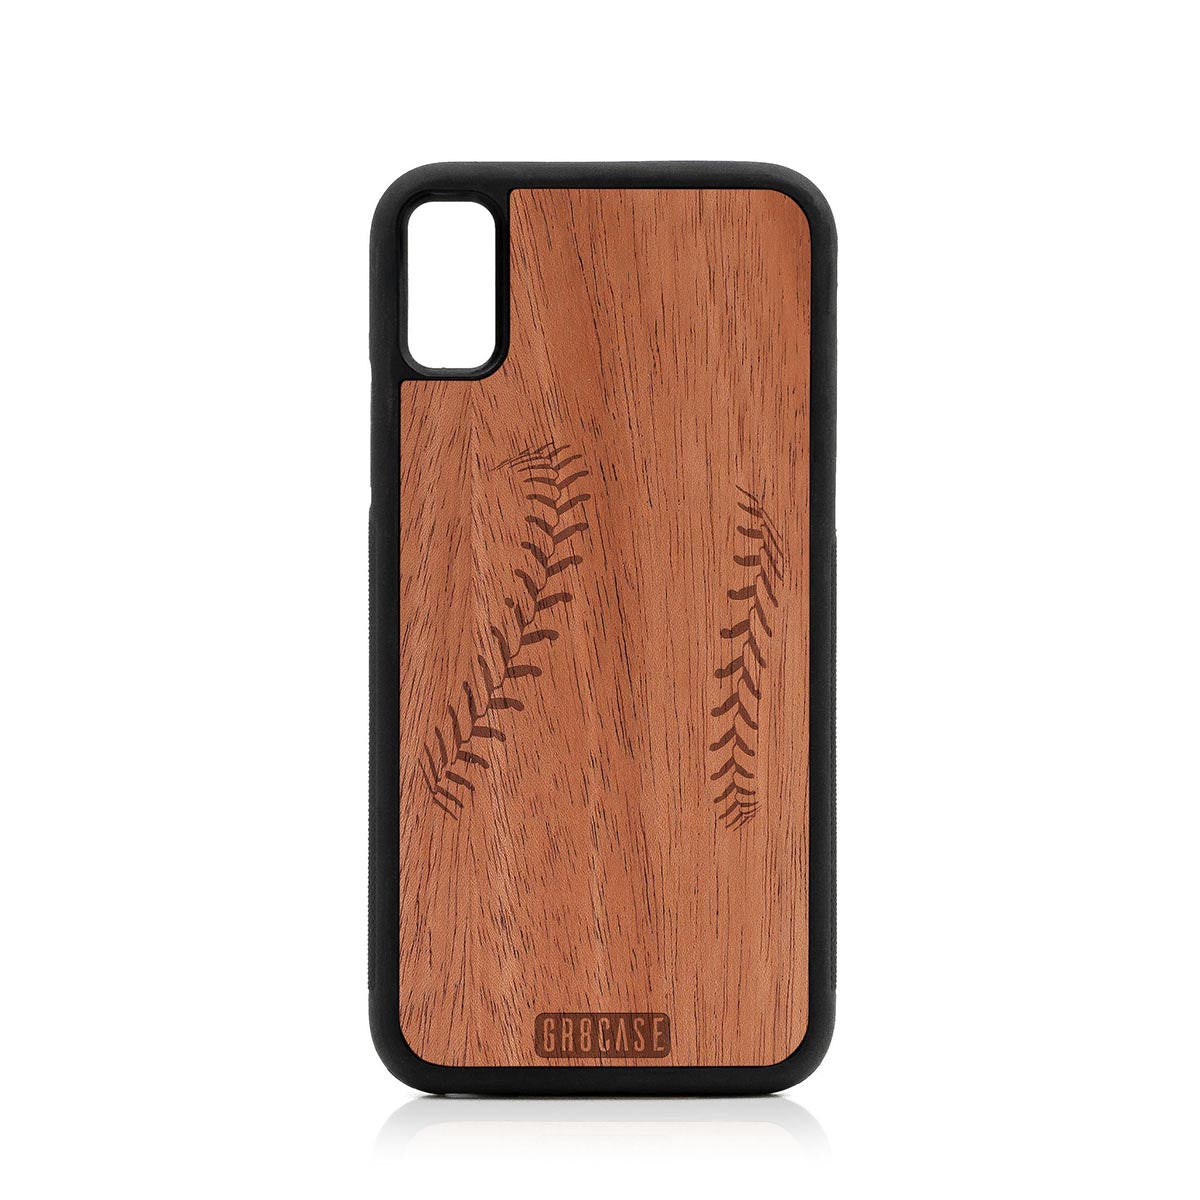 Baseball Slim Case Stitches Design Wood Case For iPhone XR by GR8CASE